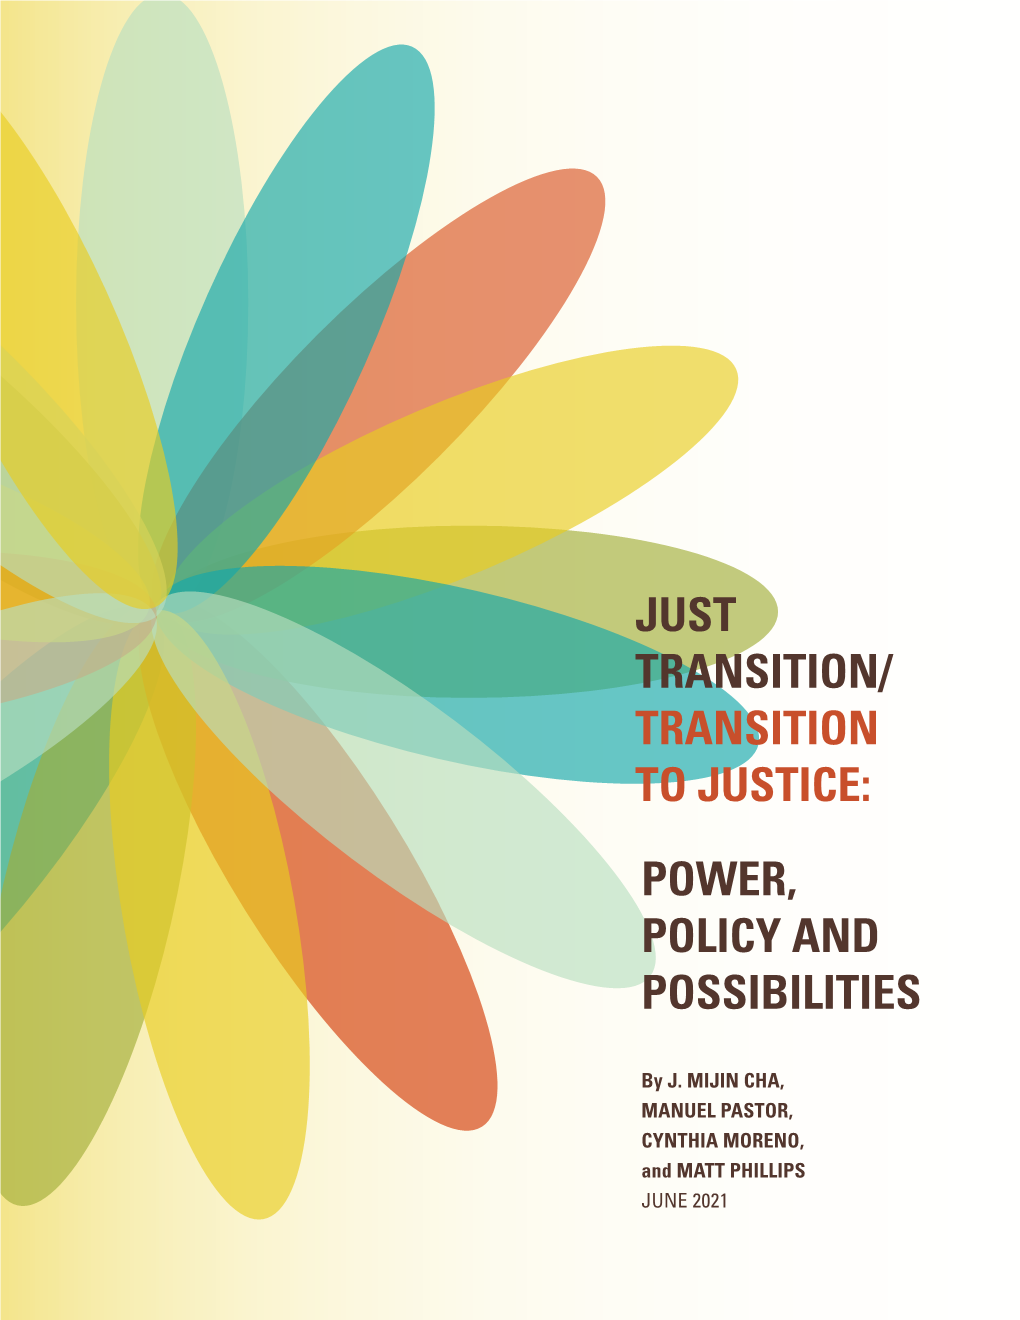 Transition to Justice: Power, Policy and Possibilities